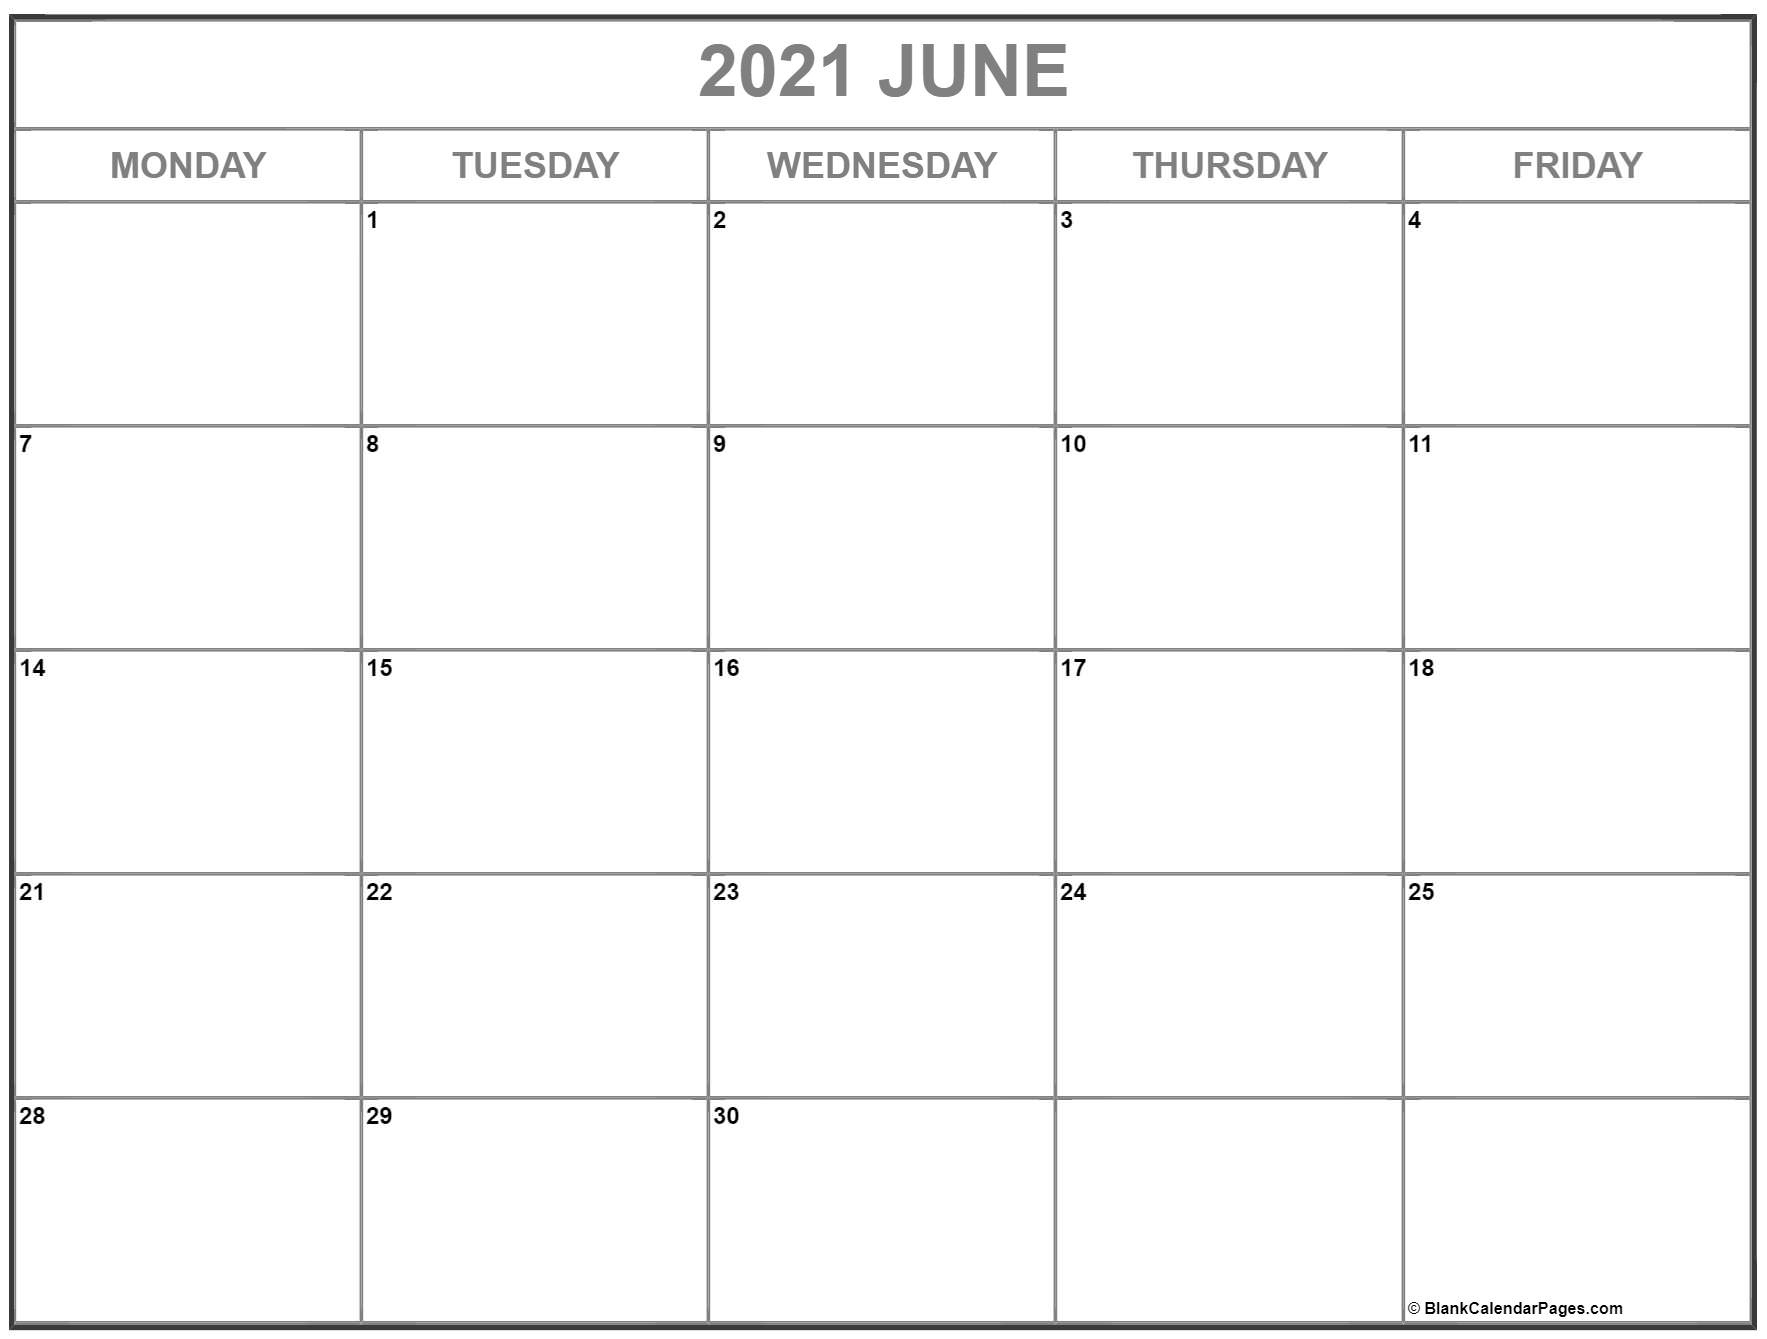 June 2021 Monday Calendar | Monday To Sunday What Will Happen In June 2021